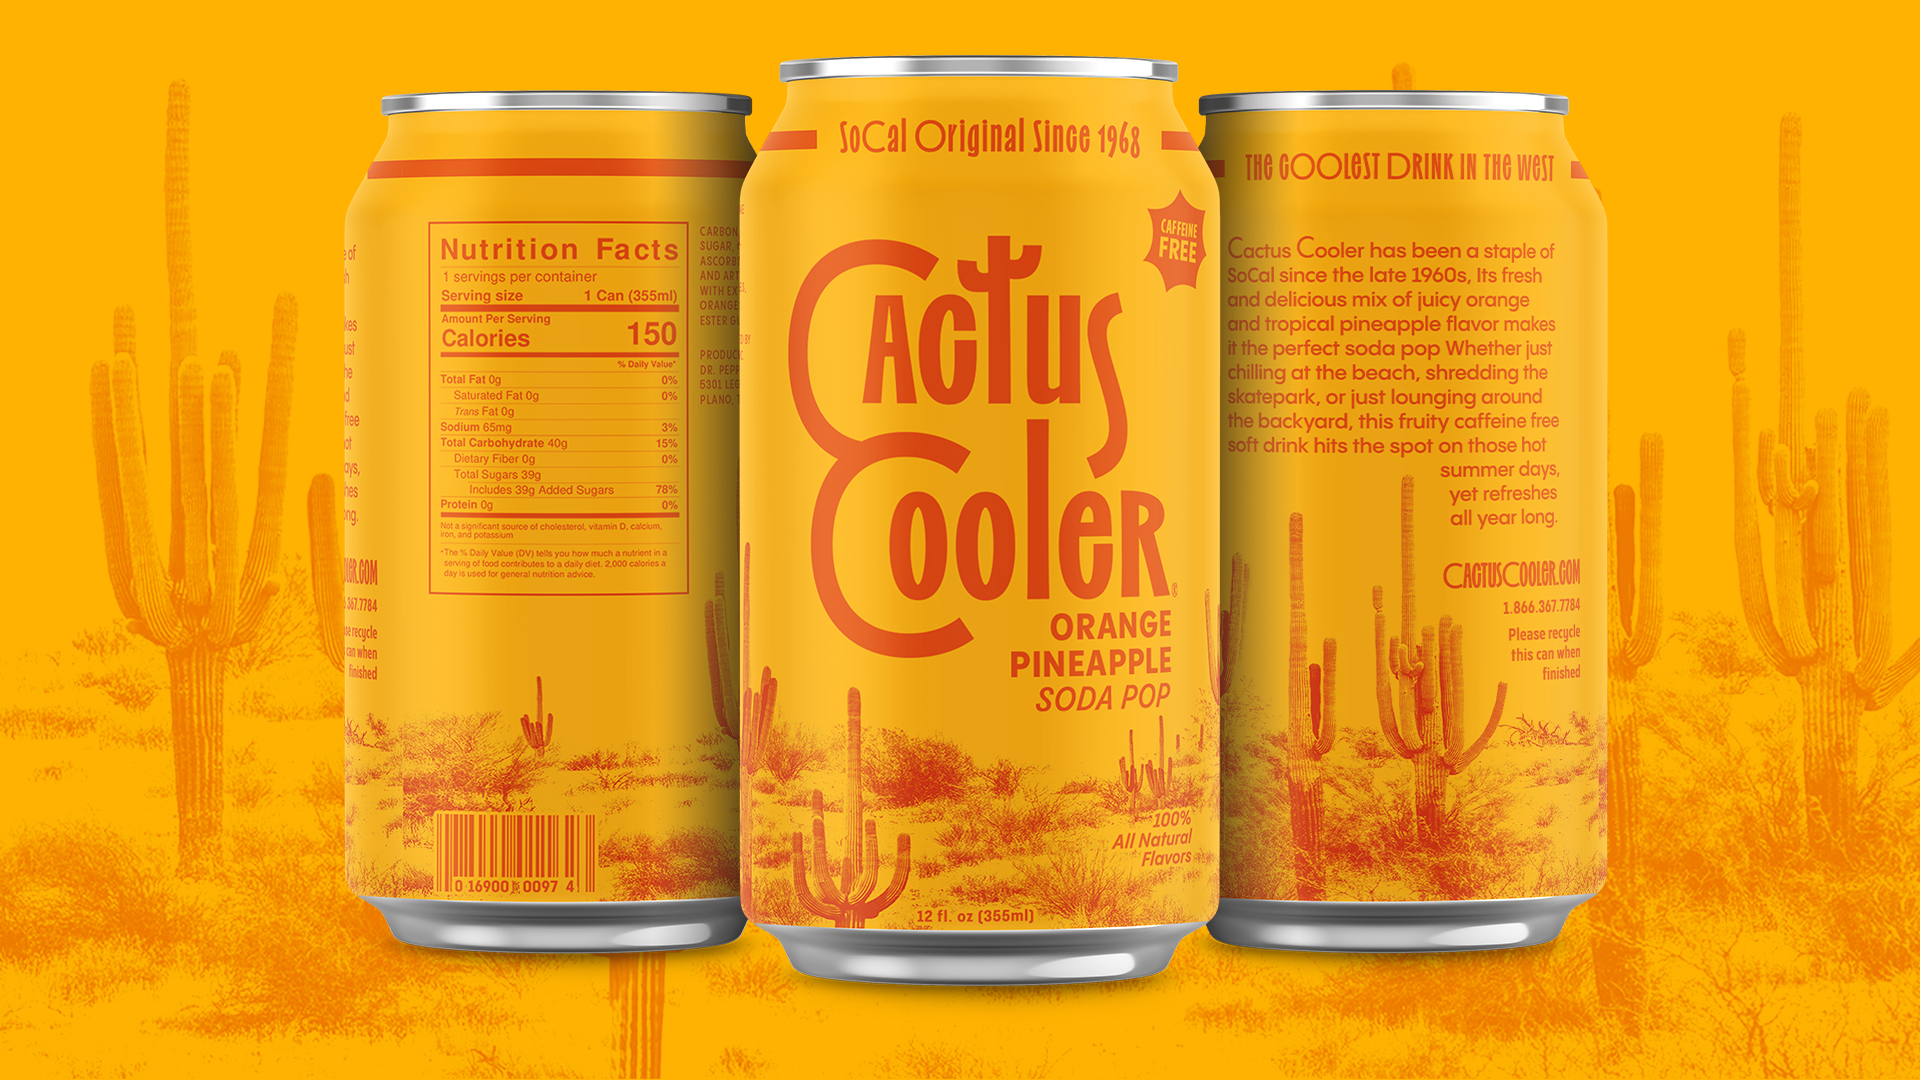 Cactus Cooler Soda Orange Pineapple Blast 12 pack 12-ounce cans